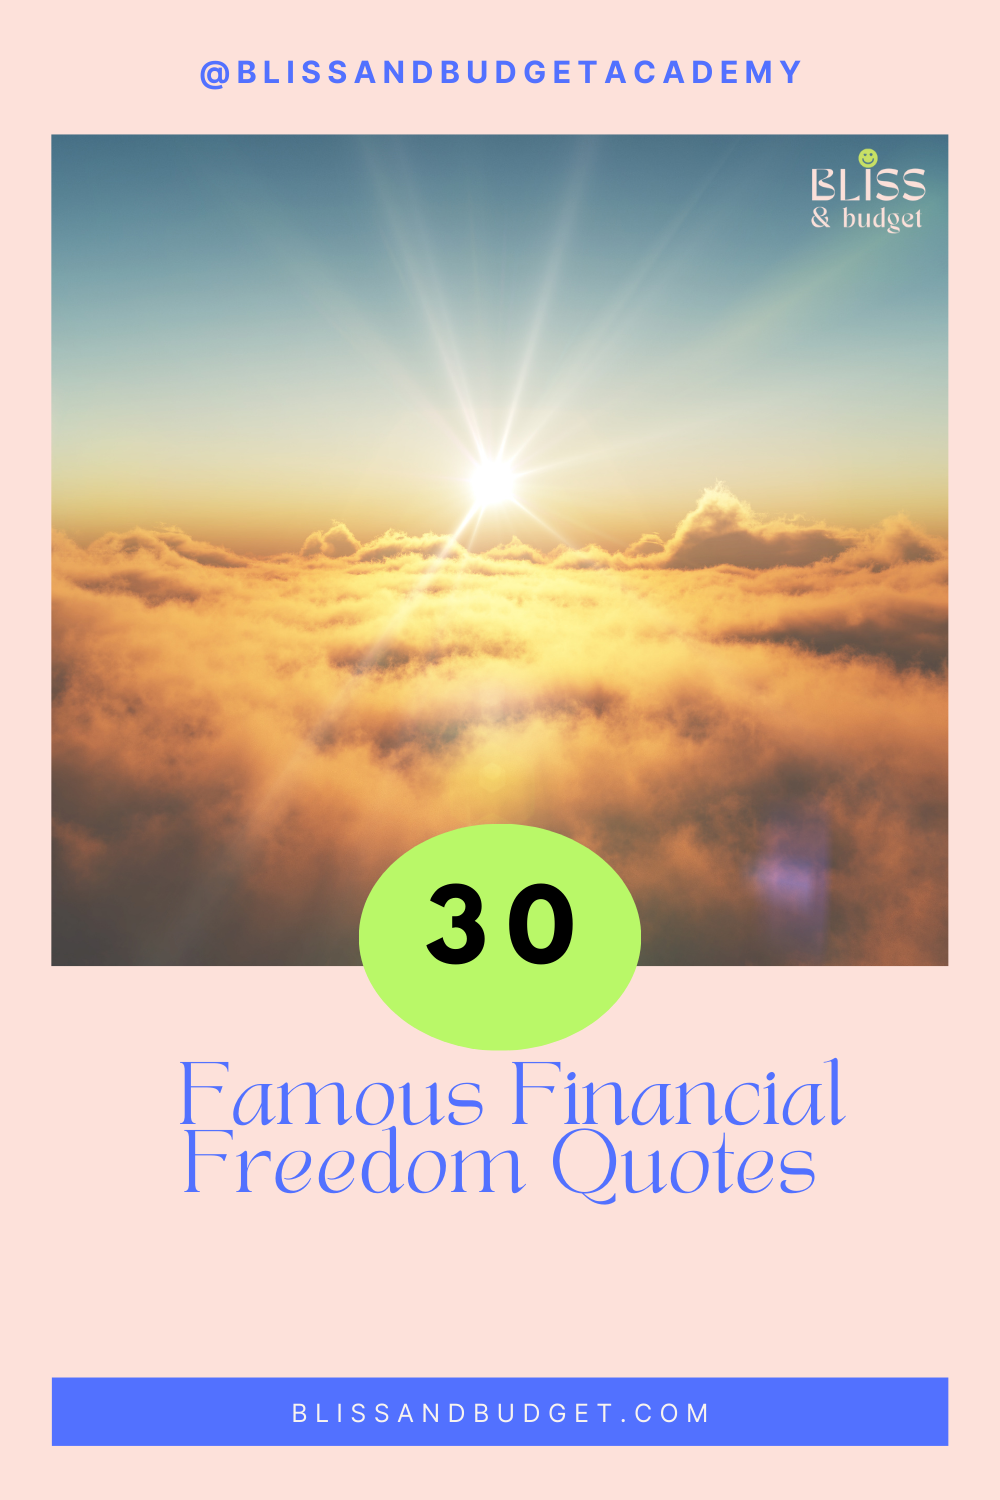 30 Famous Financial Freedom Quotes